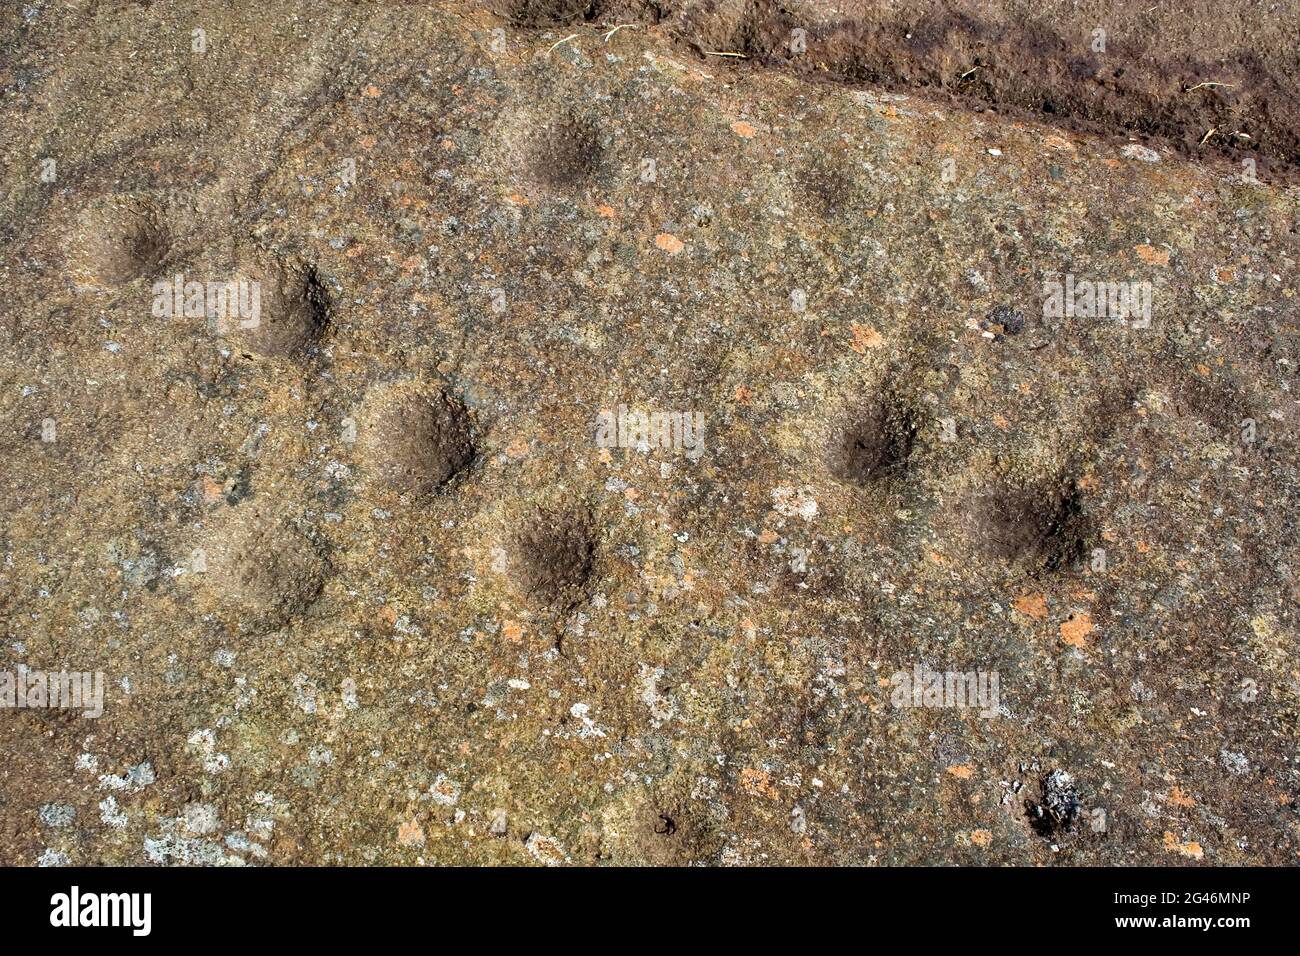 Cup and ring marked stones at Cairnbaan in Argyll Scotland Stock Photo